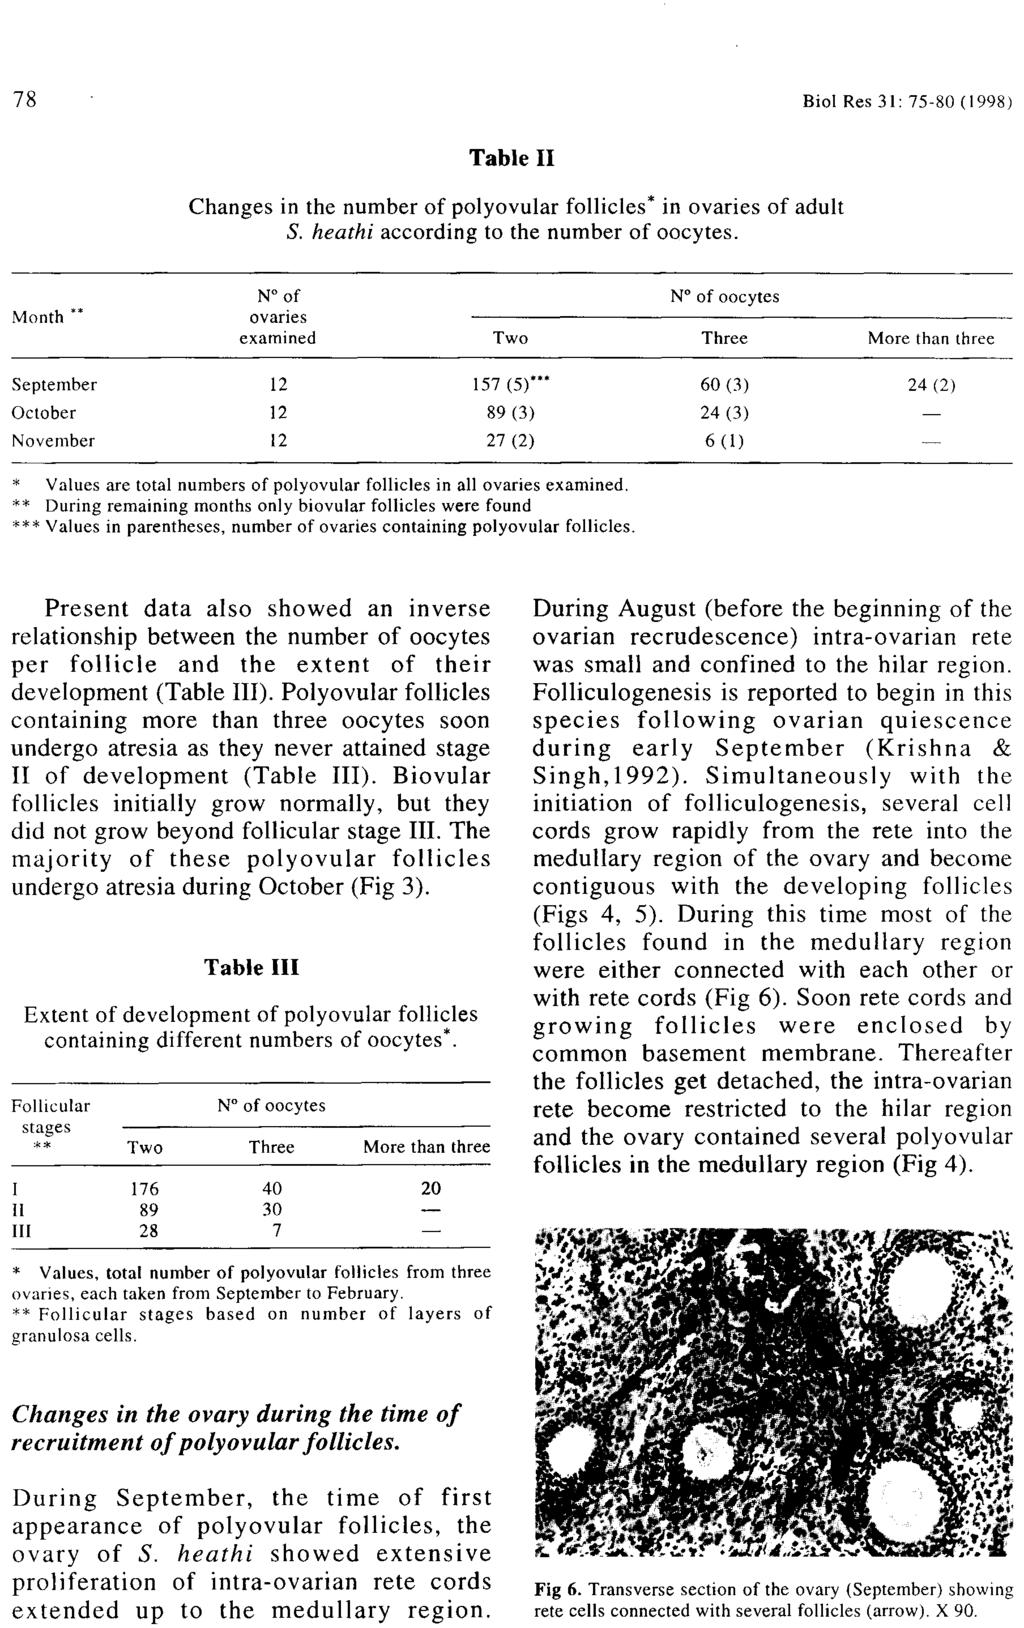 78 Biol Res 31: 75-80 (1998) Table II Changes in the number of polyovular follicles* in ovaries of adult S. heathi according to the number of oocytes.